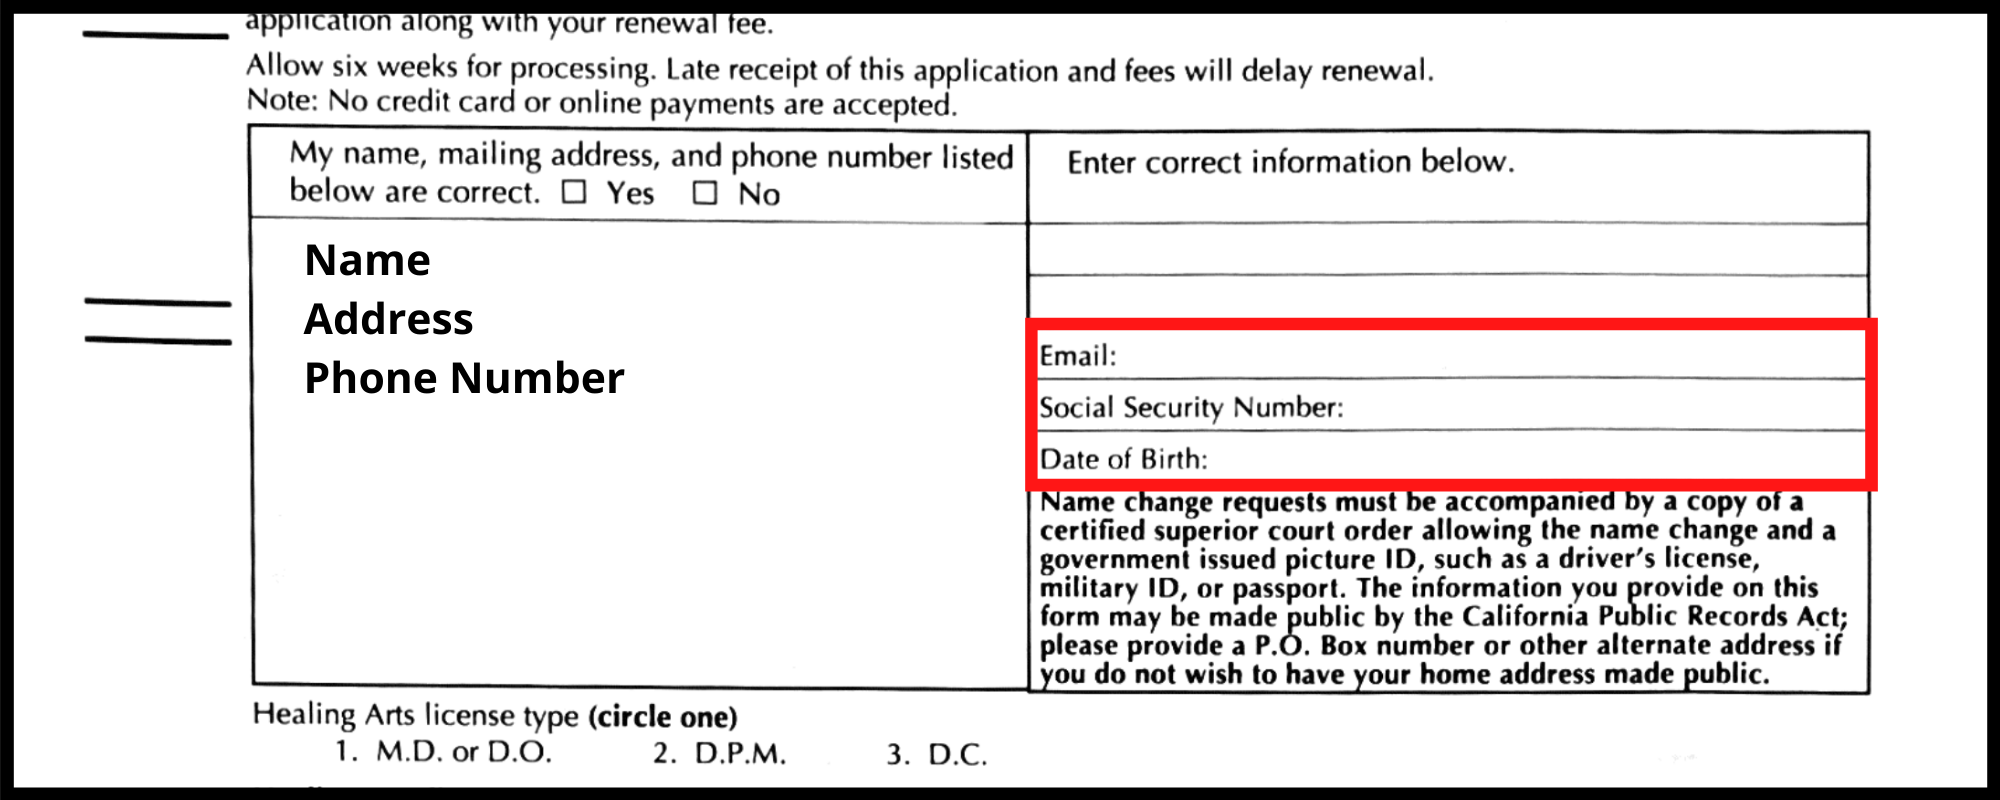 Lines "Email, Social Security Number, and Date of Birth" are surrounded by a red box